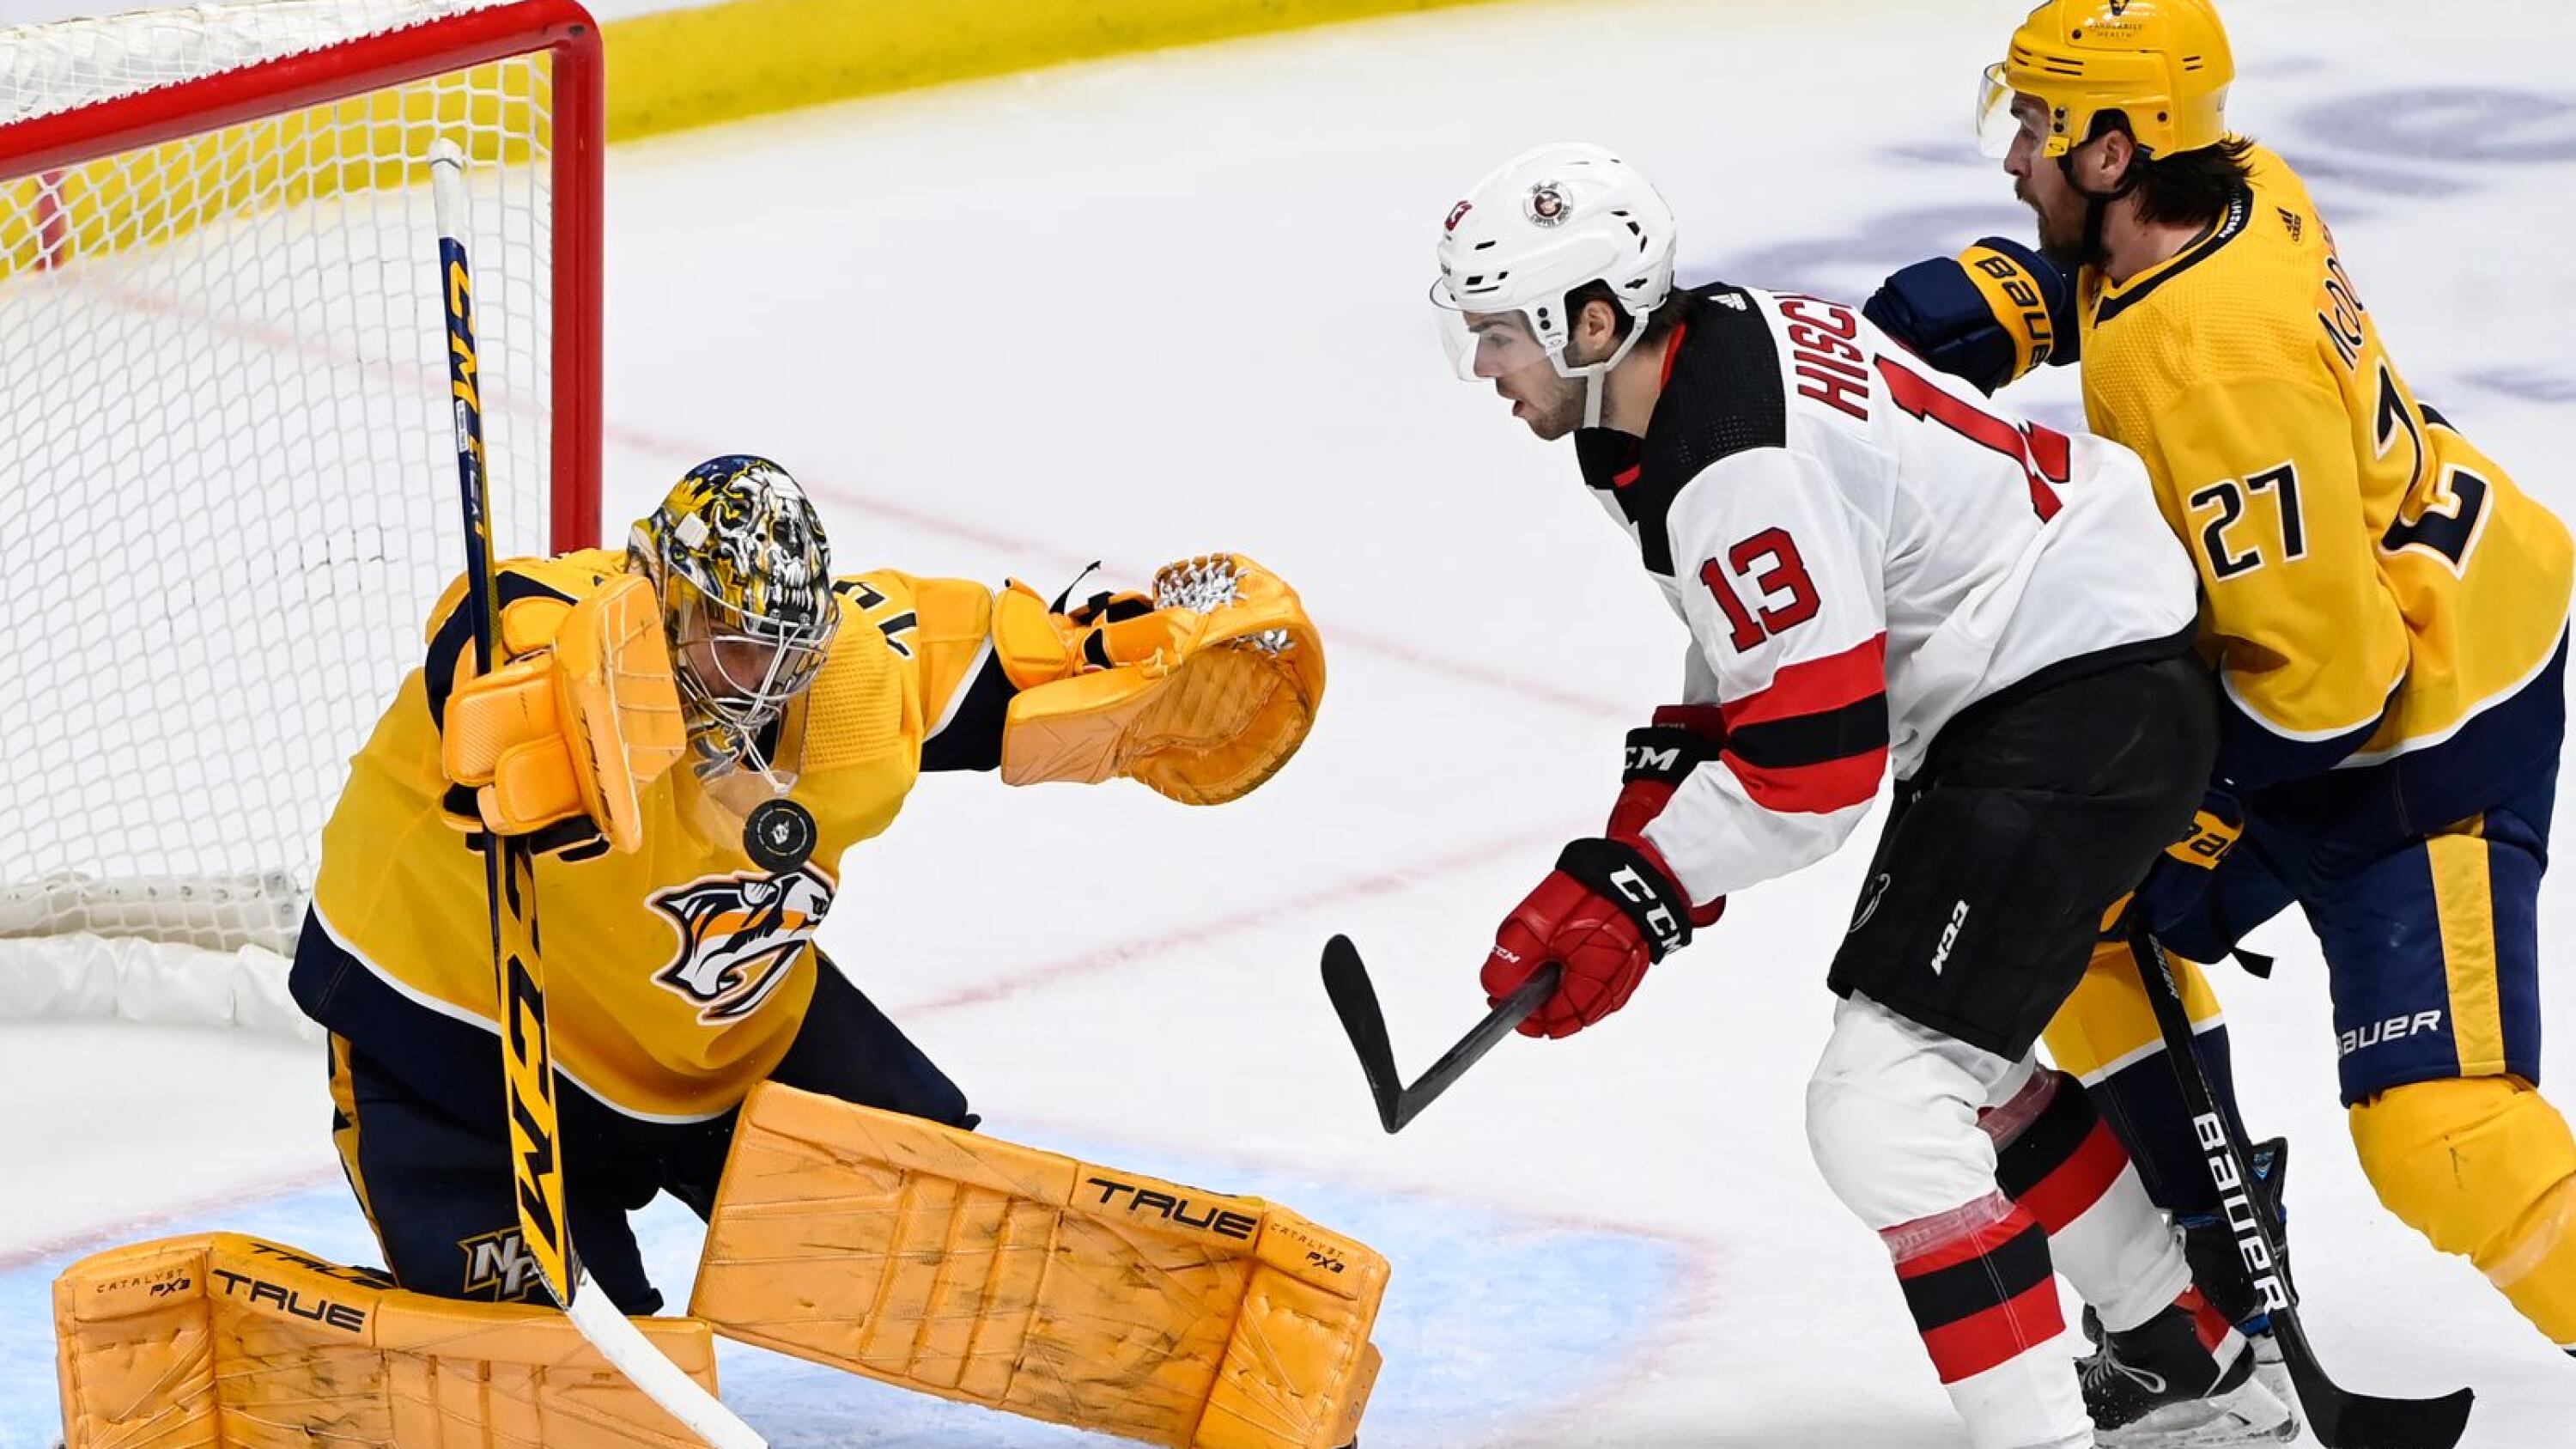 Devils lose 9th straight as Penguins finish off 3-game sweep 